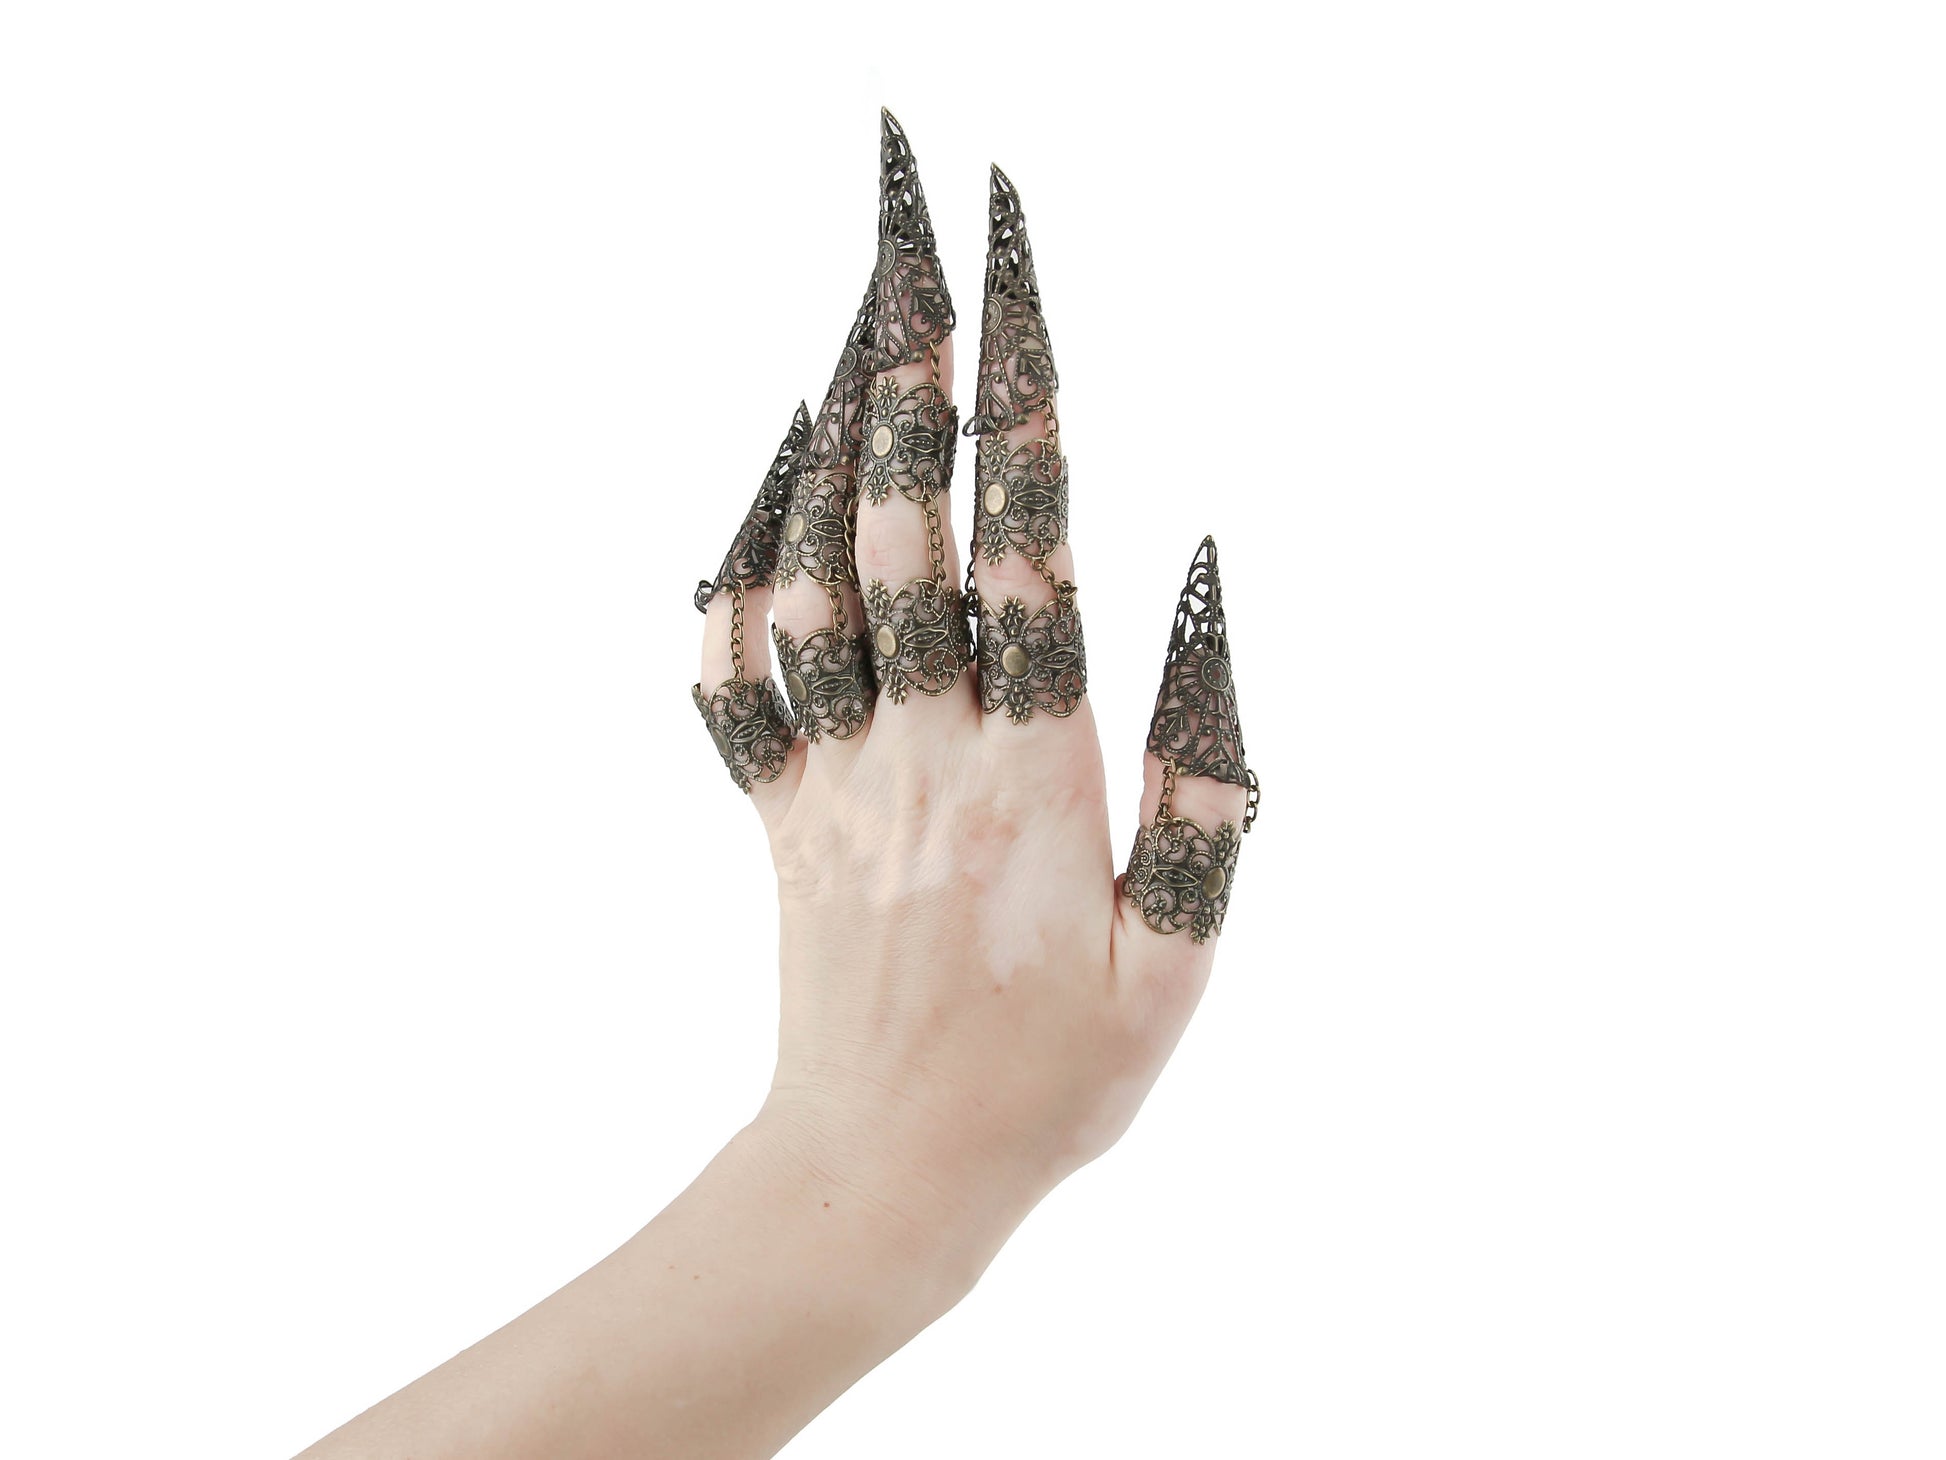 Dive into the bold world of Myril Jewels with this full hand set of armored bronze claw rings, perfect for the gothic and alternative style enthusiast. Crafted with exquisite filigree, these rings are ideal for anyone looking to make a statement, from Halloween events to drag performances. They embody the spirit of Neo Gothic, Witchcore, and Whimsigoth, providing a striking complement to any minimal goth or Gothic-chic look.